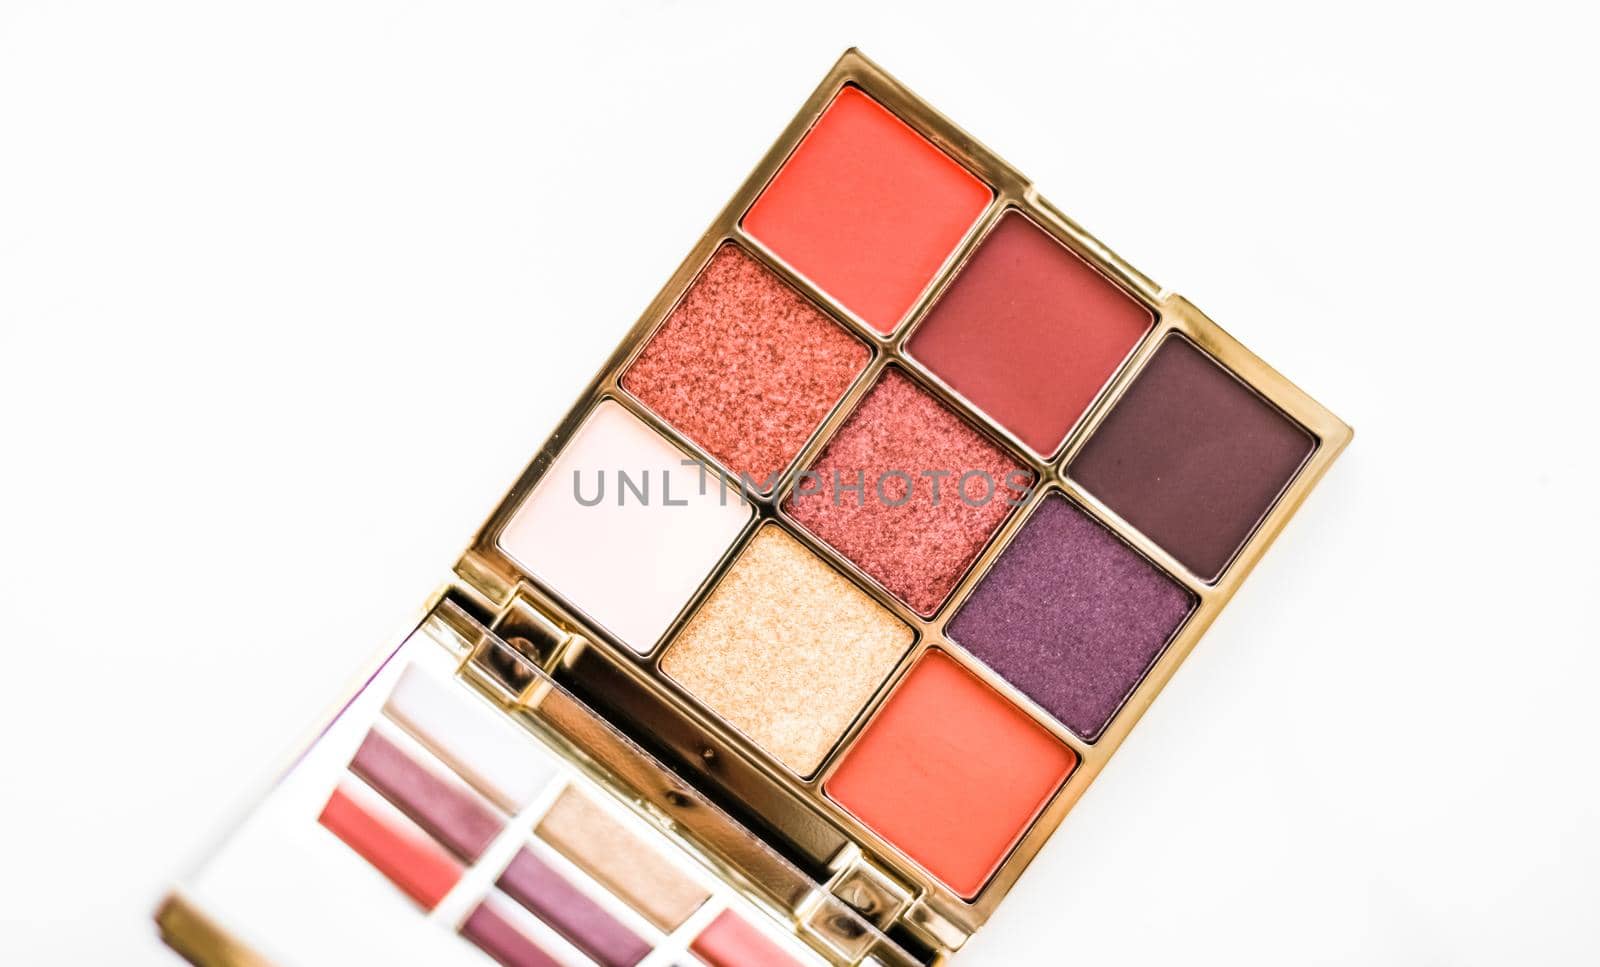 Eye shadow palette on marble background, make-up and cosmetics product for luxury beauty brand sale promotion and holiday flatlay design by Anneleven